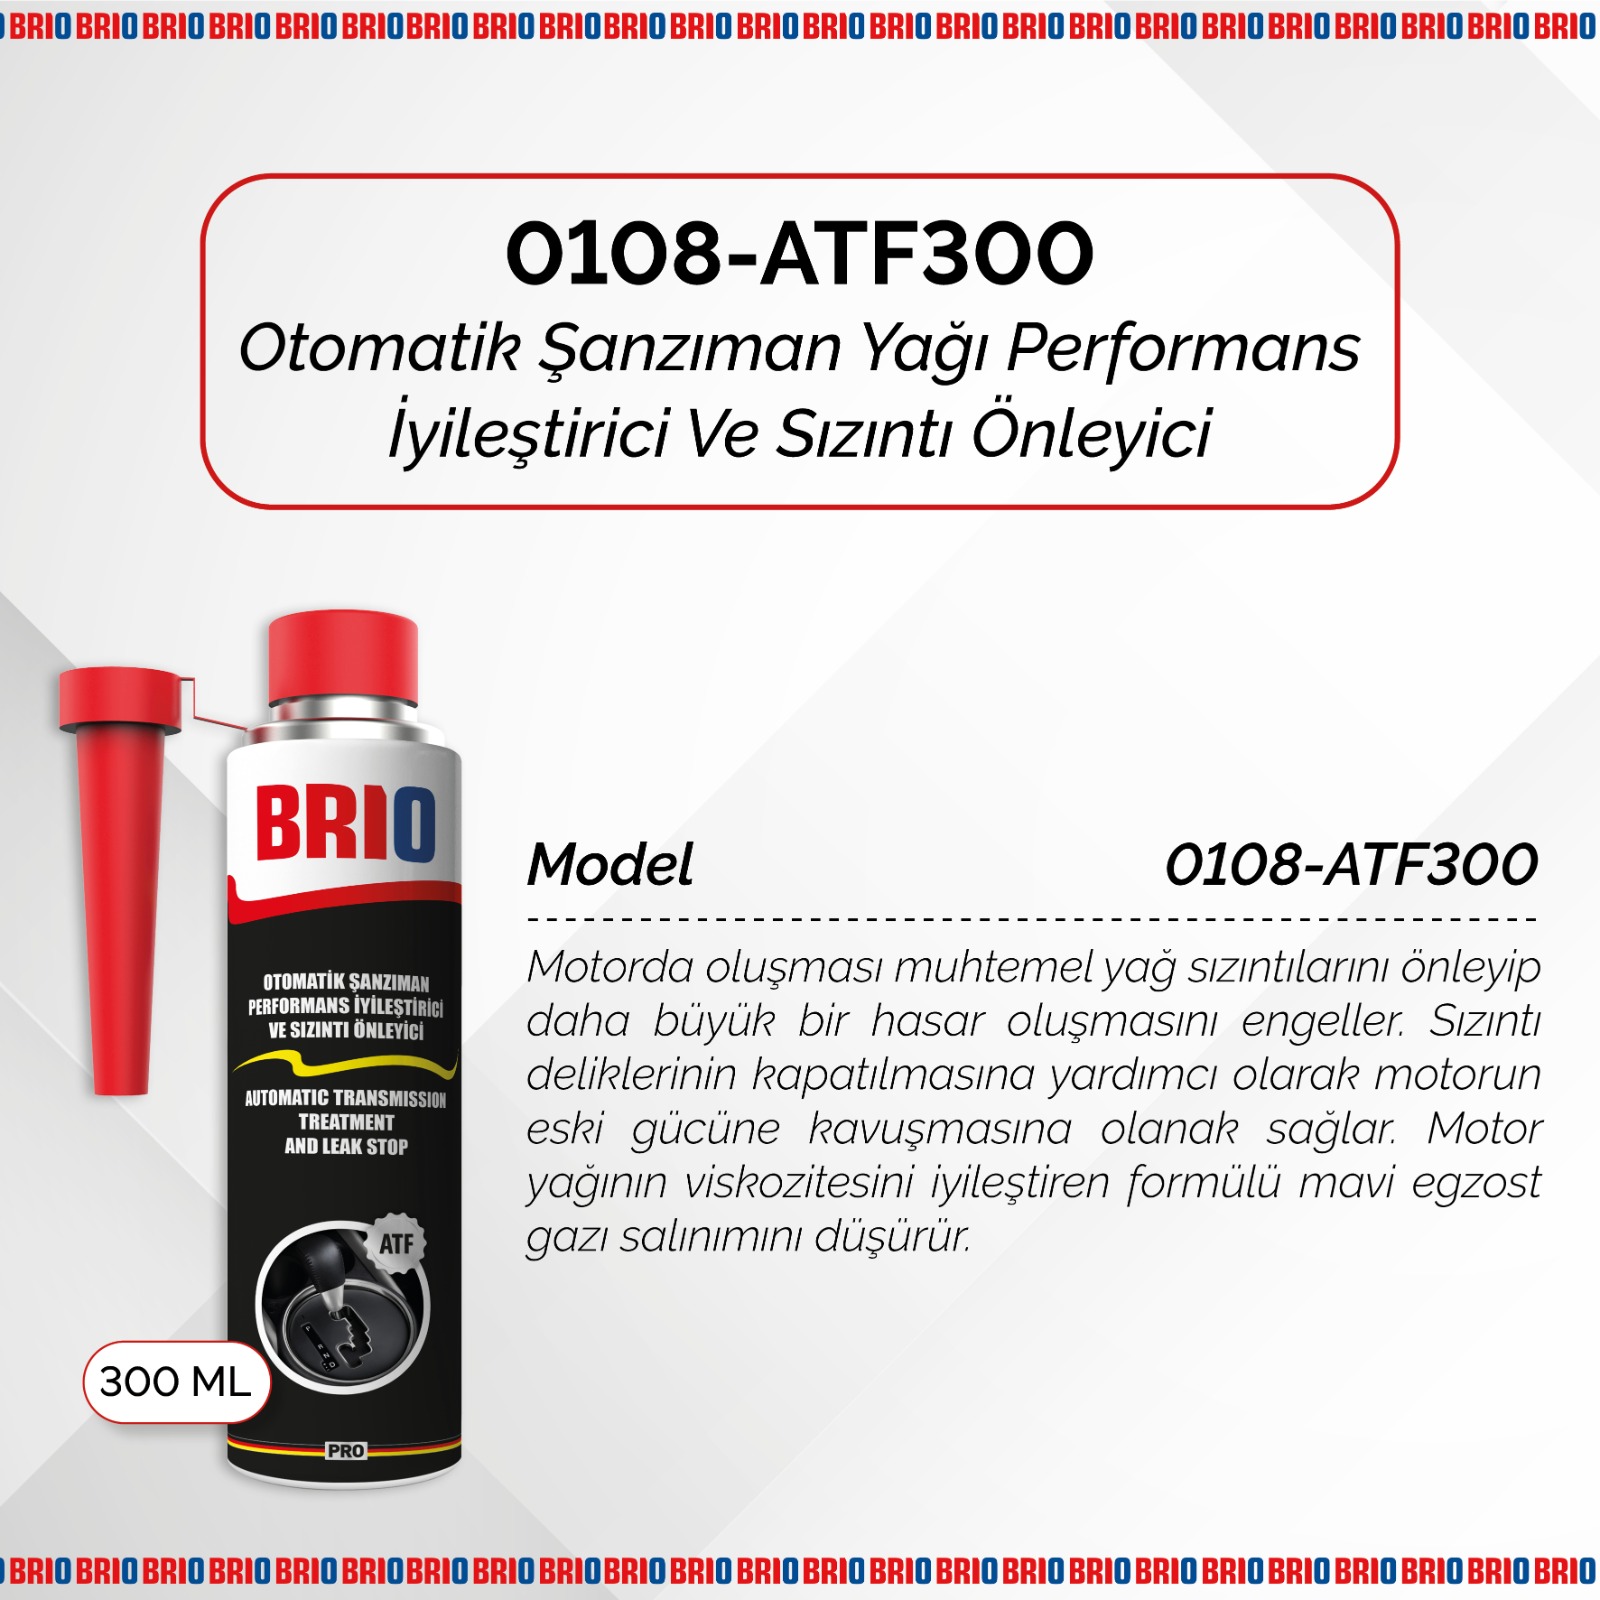 Atf%20Performance%20improver%20And%20Anti-Leakage%20300%20Ml